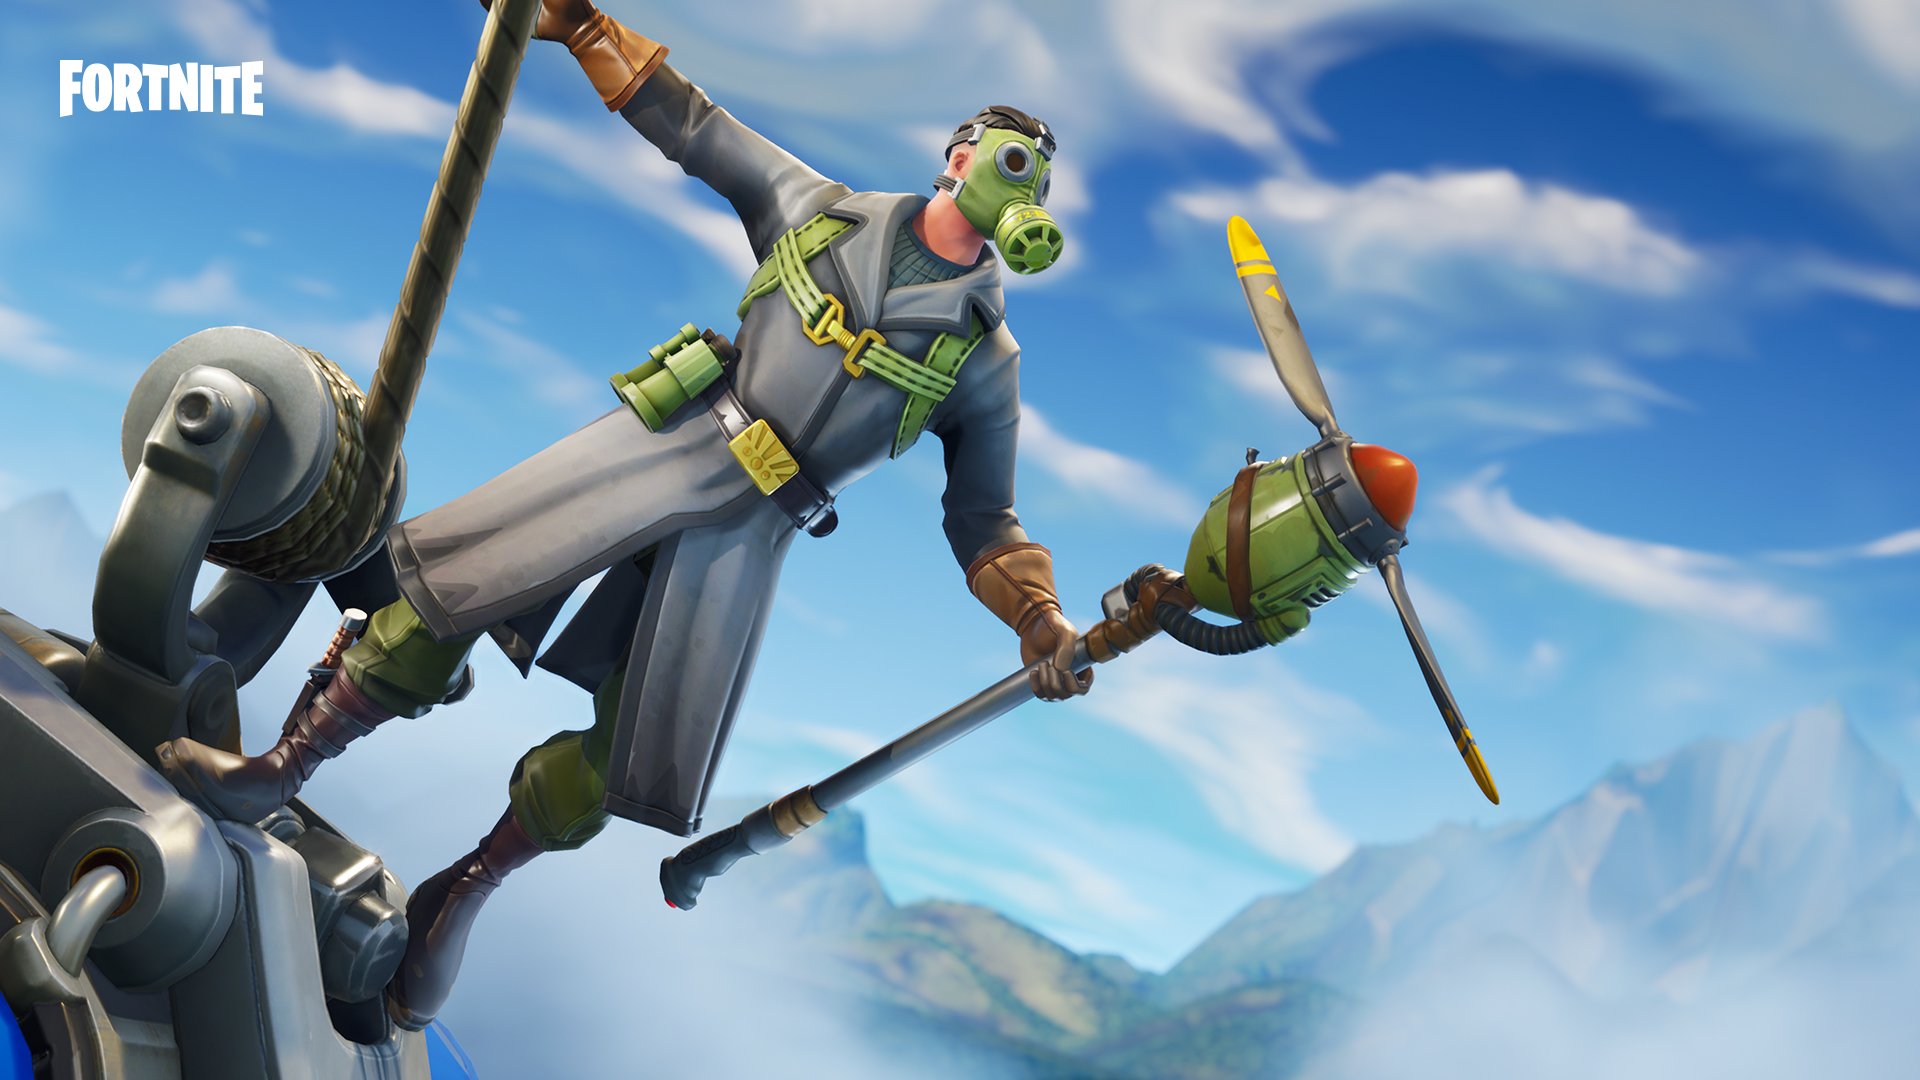 Fortnite latest events and content updates June 2018